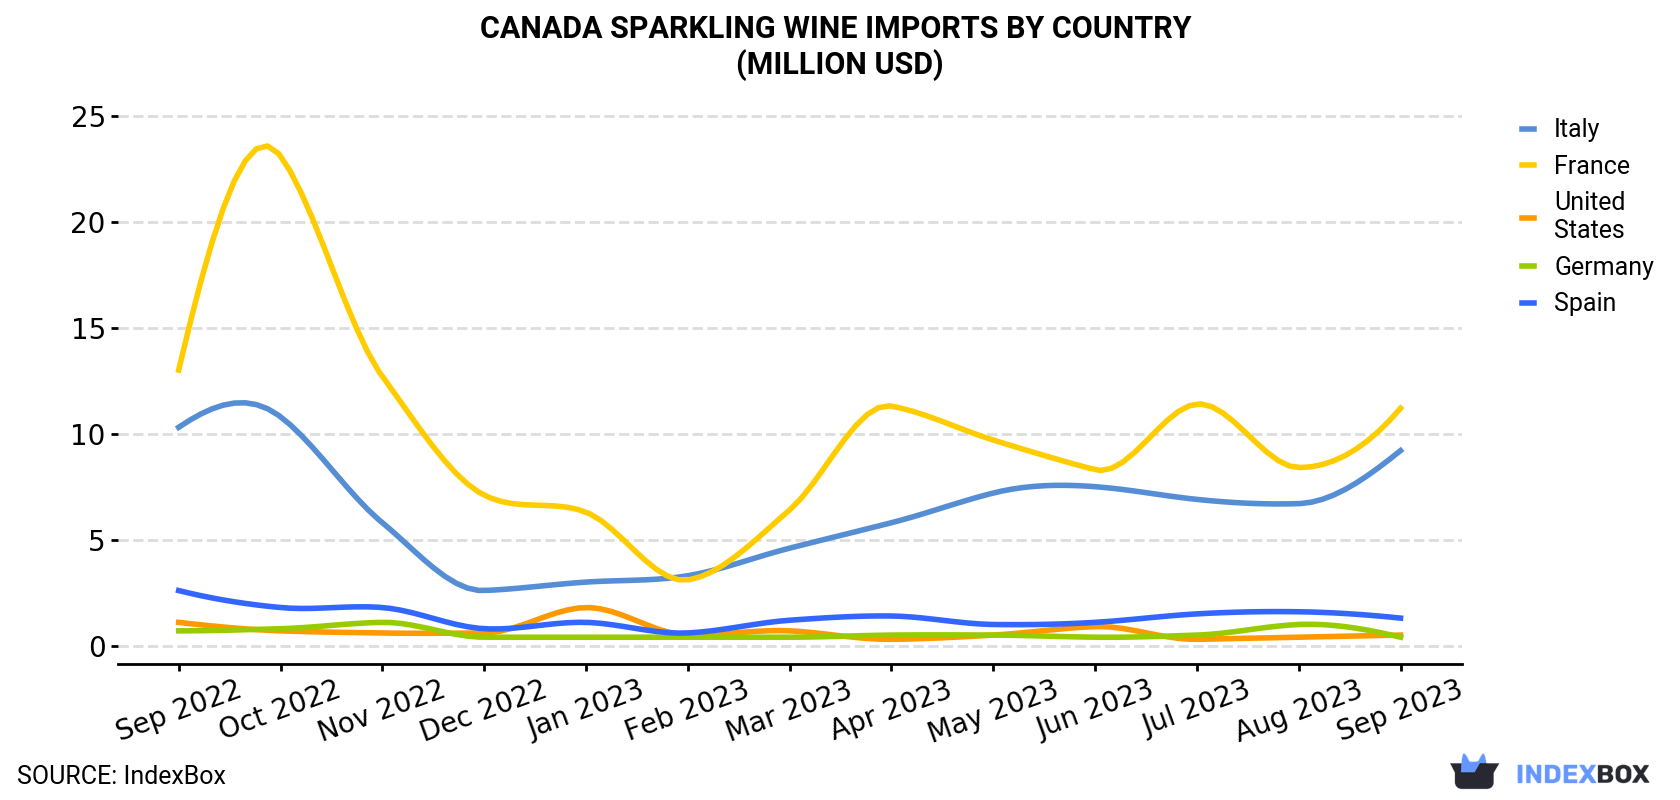 Canada Sparkling Wine Imports By Country (Million USD)